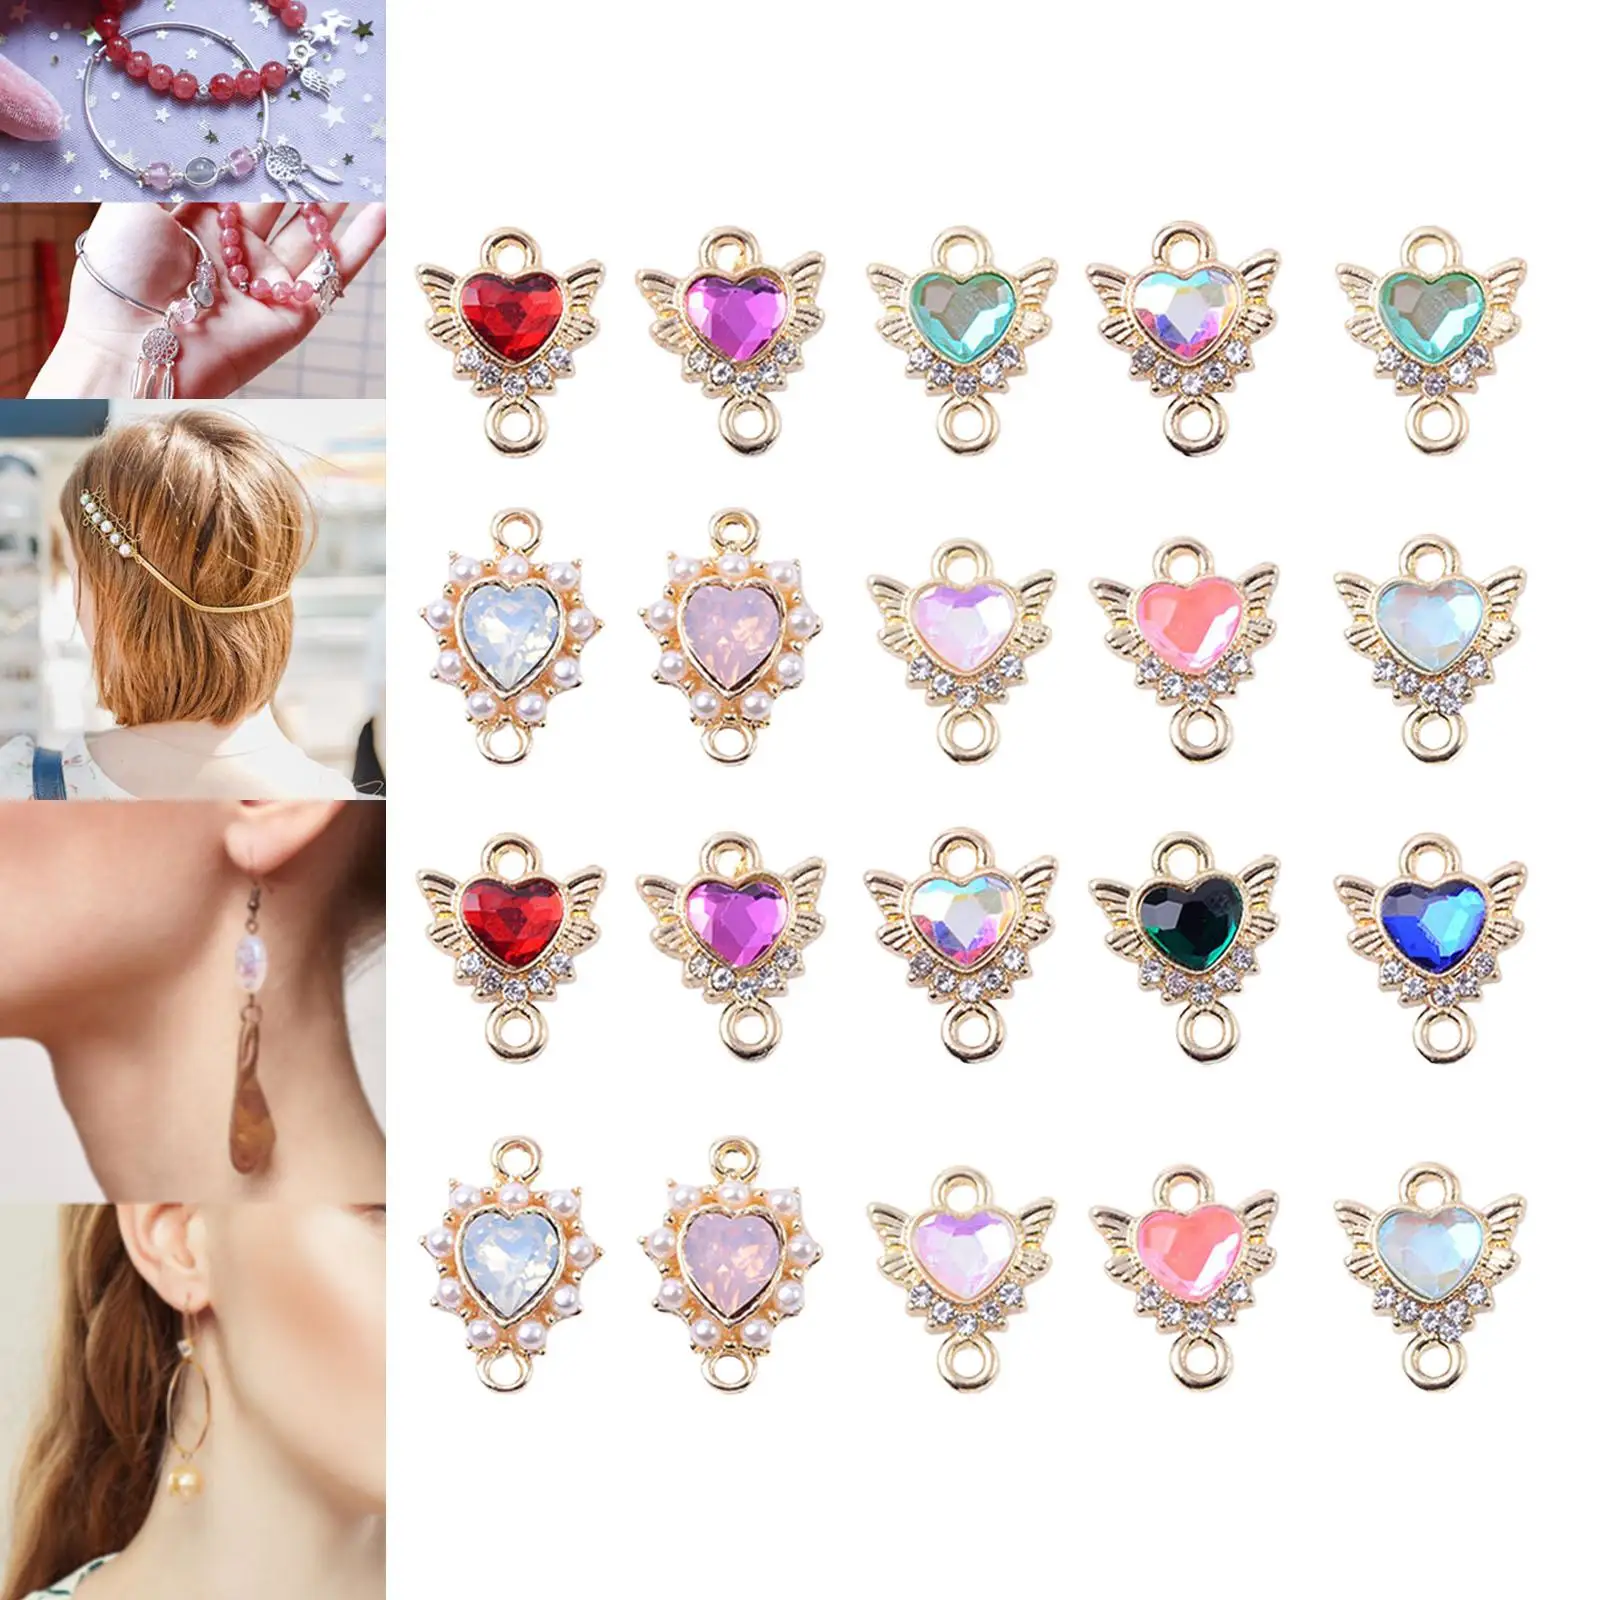 20 Heart Charms Pendants  Charms for Jewellery Making Earring Bracelet Accessories